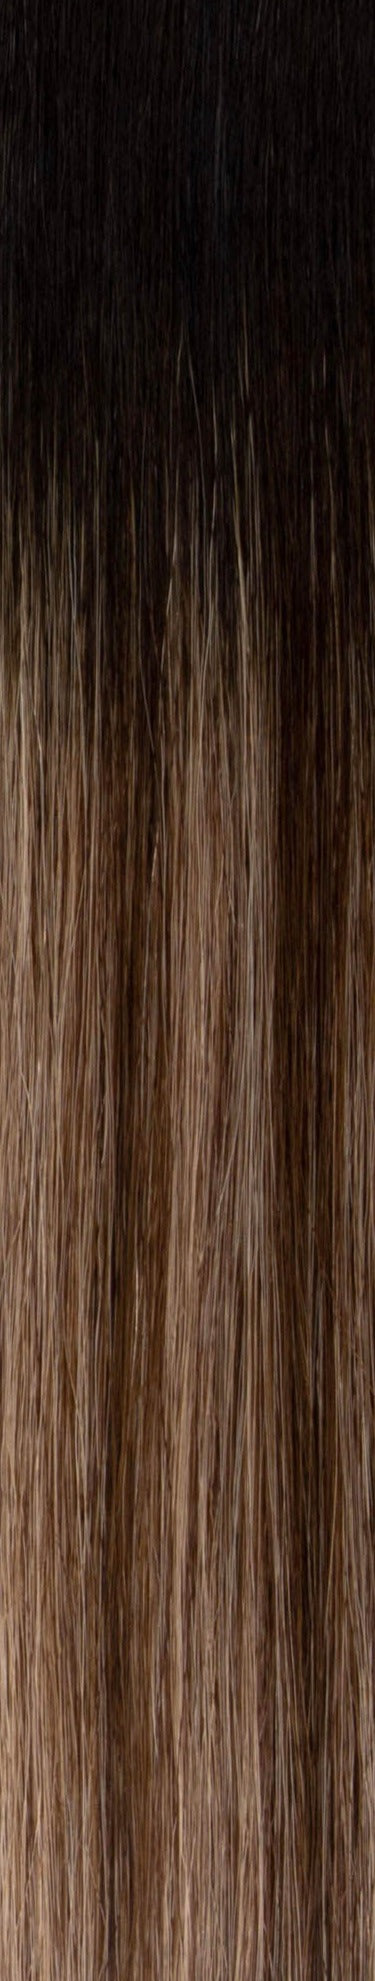 ELEGANCE TAPED HAIR (ROOT STRETCH, OMBRE & DIP DYE)